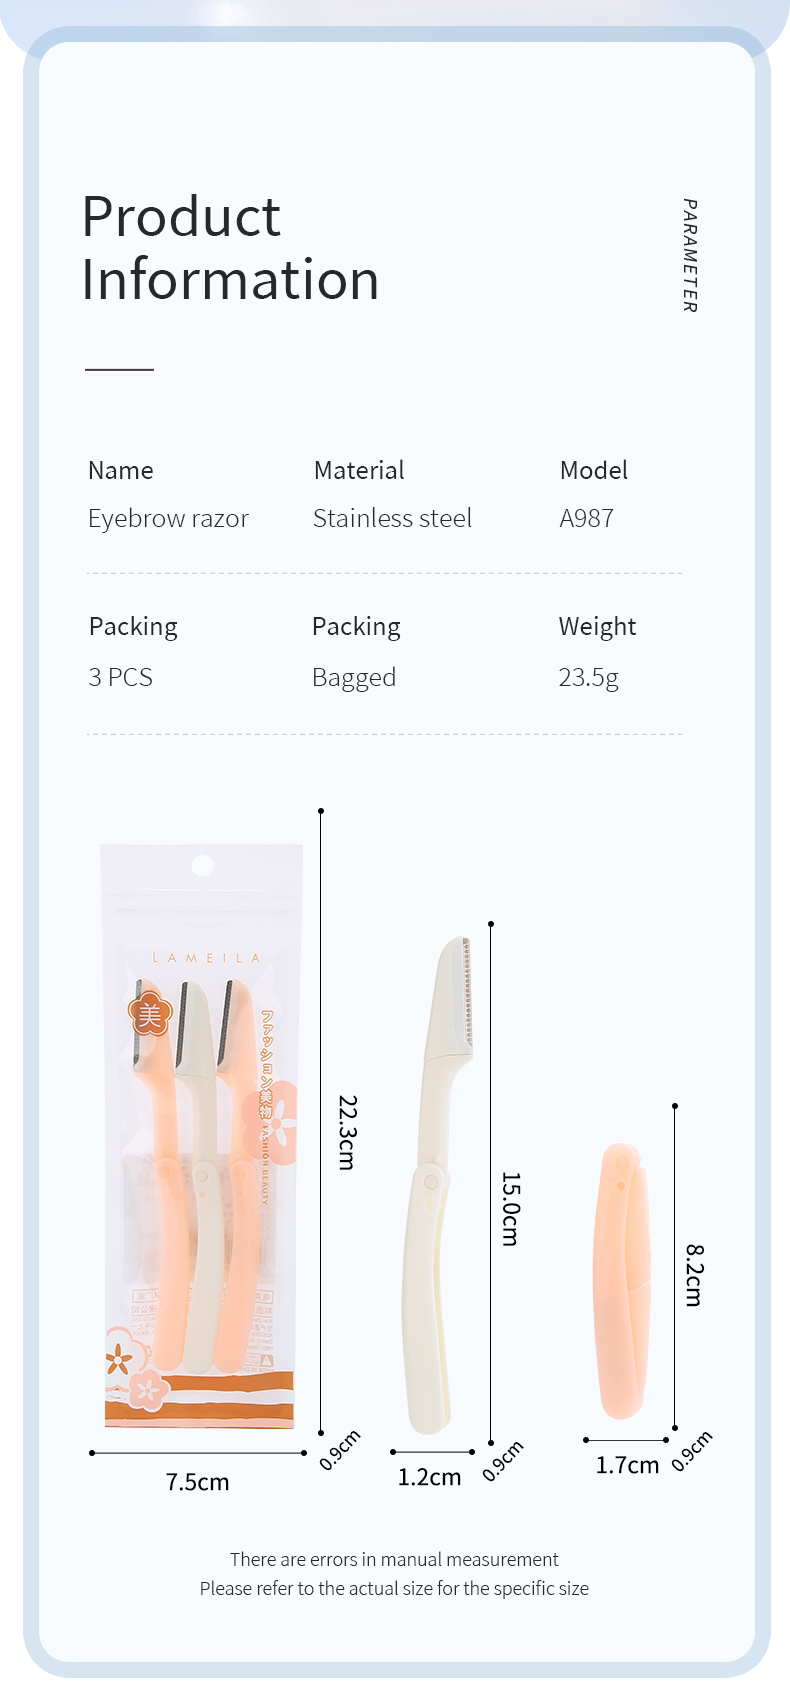 Lameila Wholesale Makeup Tools Female Eyebrows Razor Shaper Kits 3pcs Stainless Steel Eyebrow Trimmer Set For Woman A987